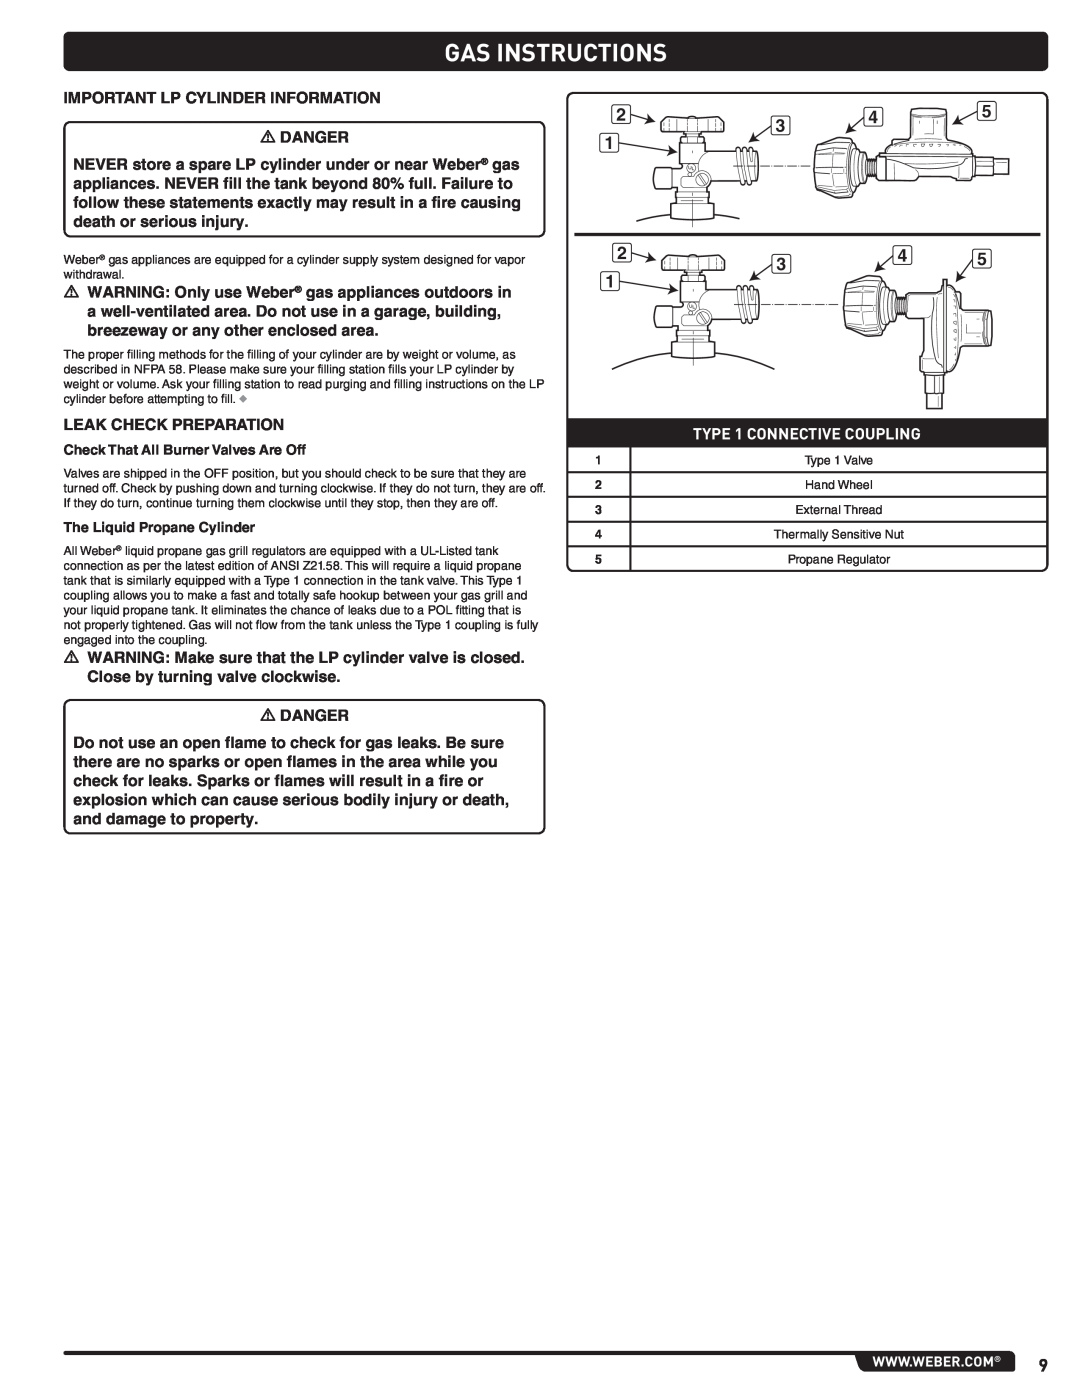 Summit 56214 manual Gas Instructions, TYPE 1 CONNECTIVE COUPLING, Check That All Burner Valves Are Off 